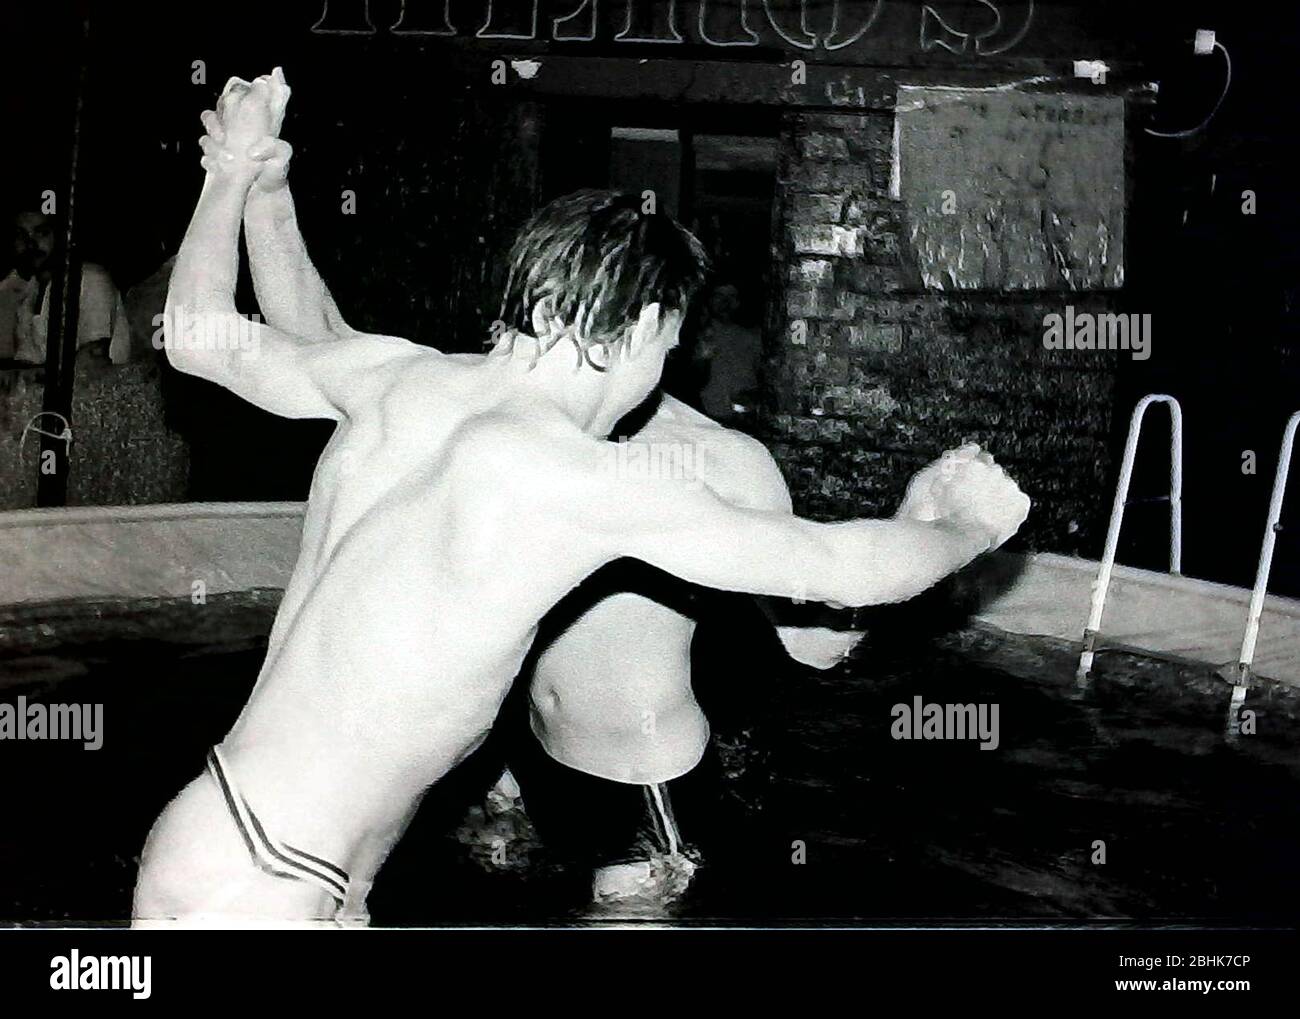 Two young men wrestling in a temporary swimming pool in Hero's club in Manchester, England, United Kingdom, a popular club for gay male customers, in April 1984. Daily life in the night life of Manchester's gay clubs and bars in the 1980's. Stock Photo